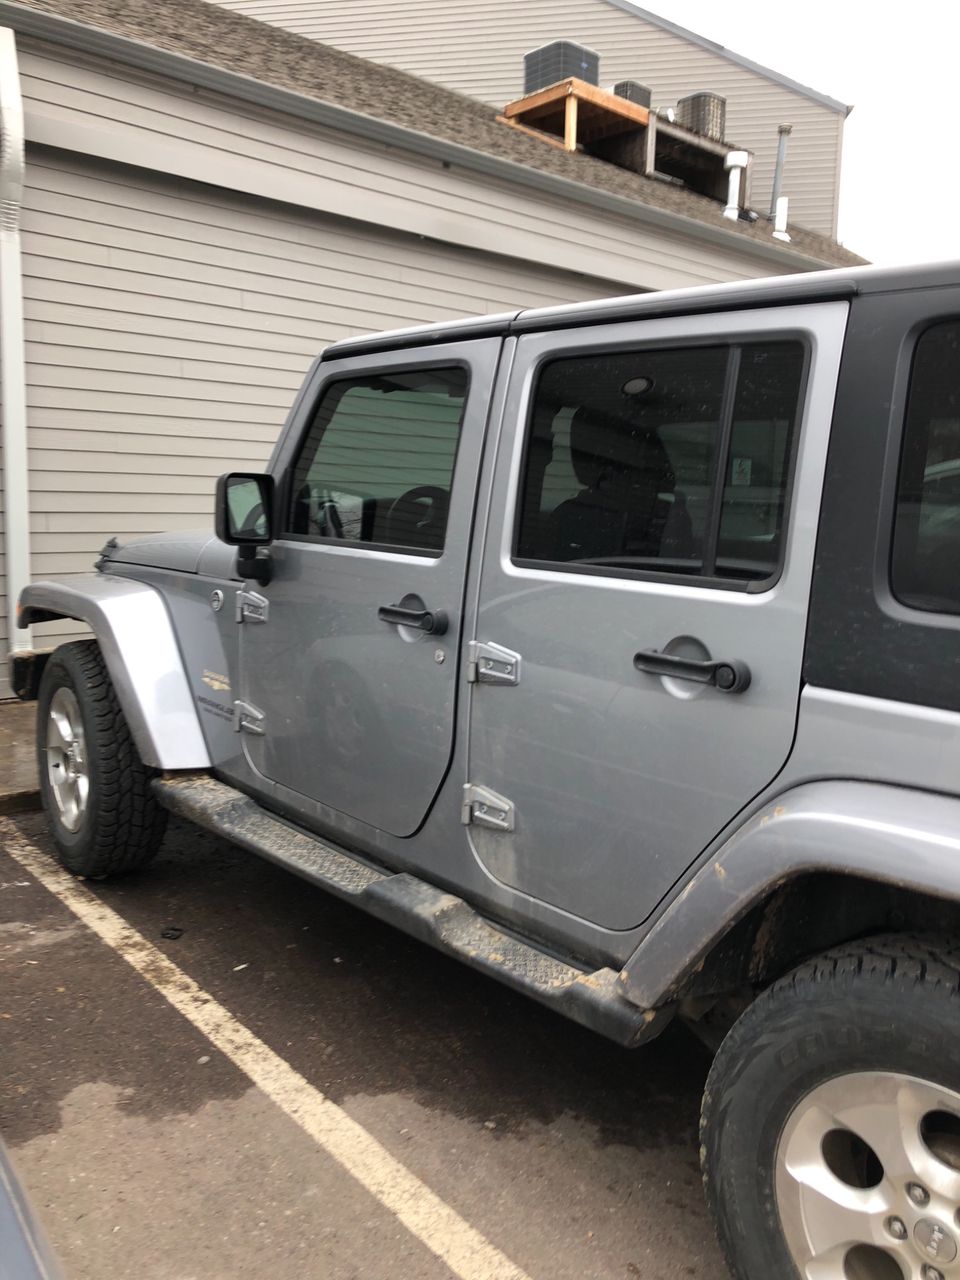 2013 Jeep Wrangler Unlimited | Sioux Falls, SD, Billet Silver Metallic Clear Coat (Silver), 4x4